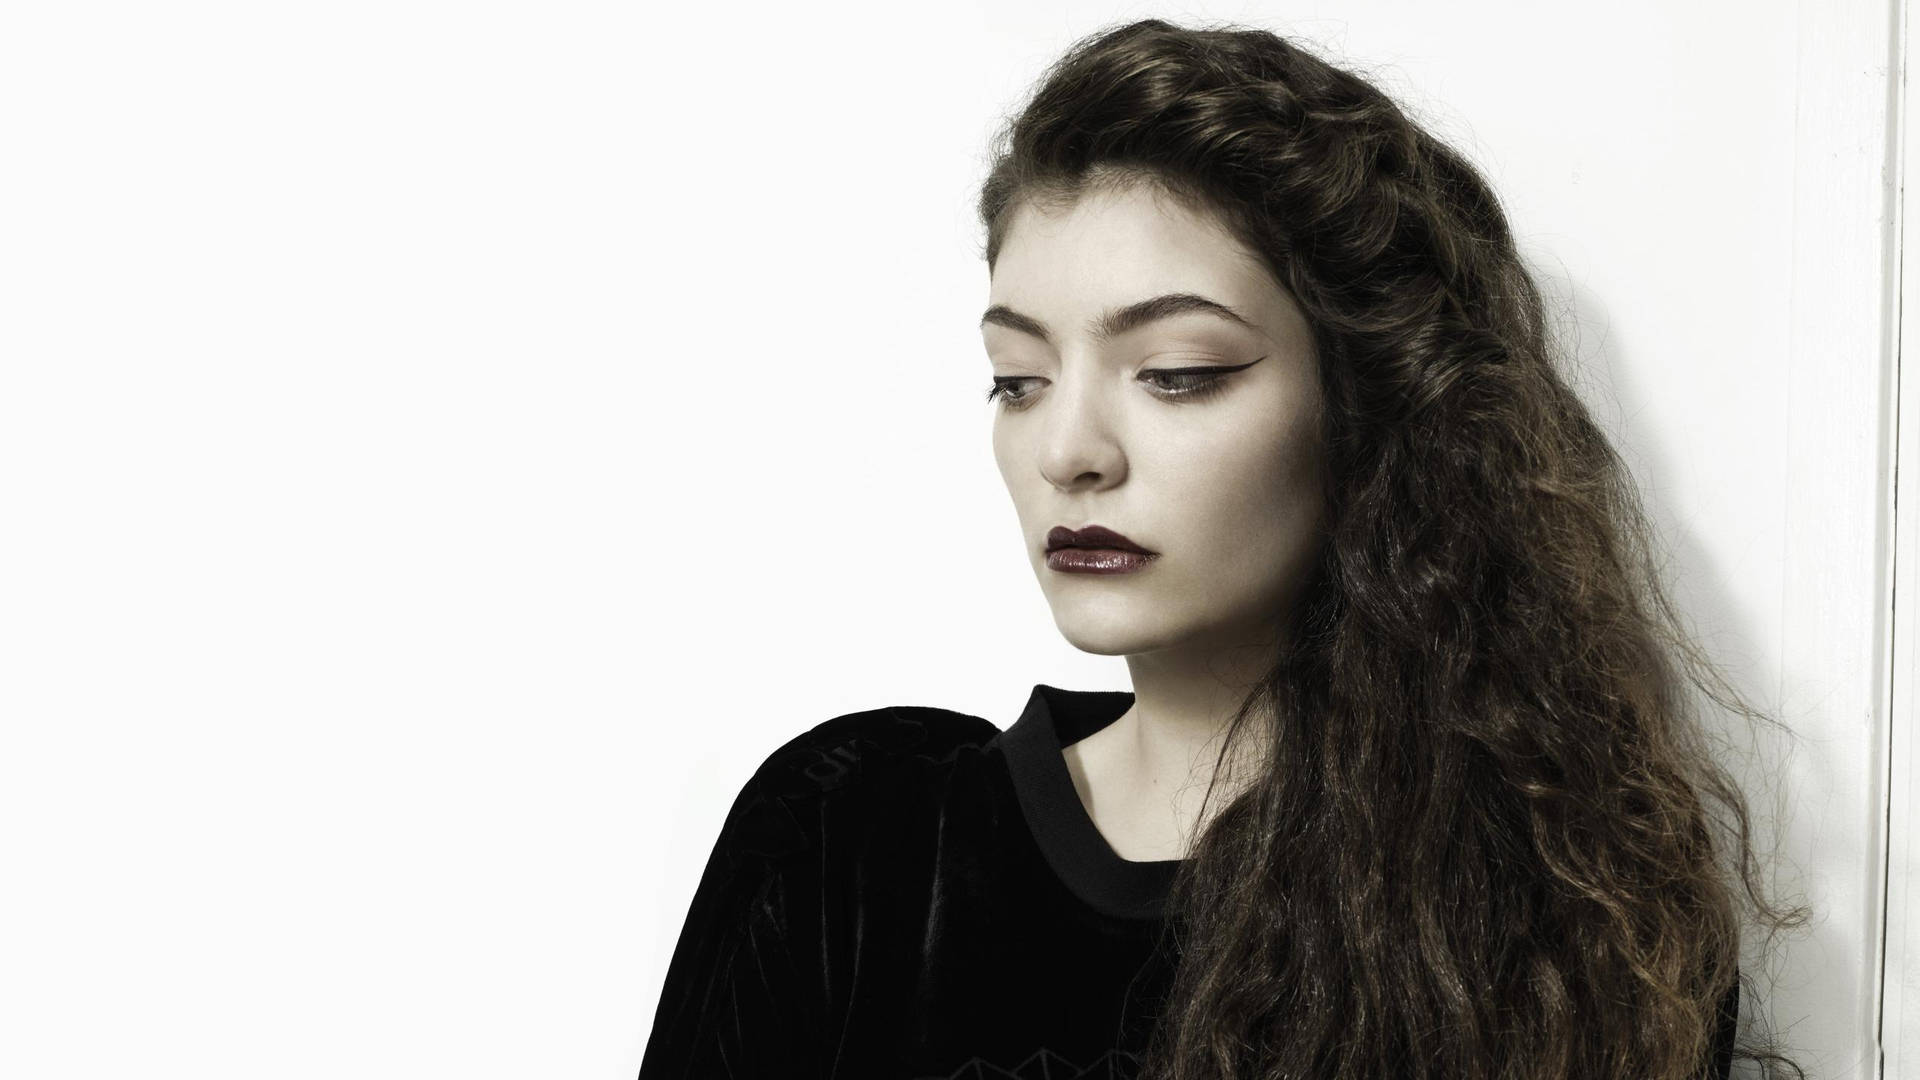 Lorde In A Stunning Concert Pose. Wallpaper